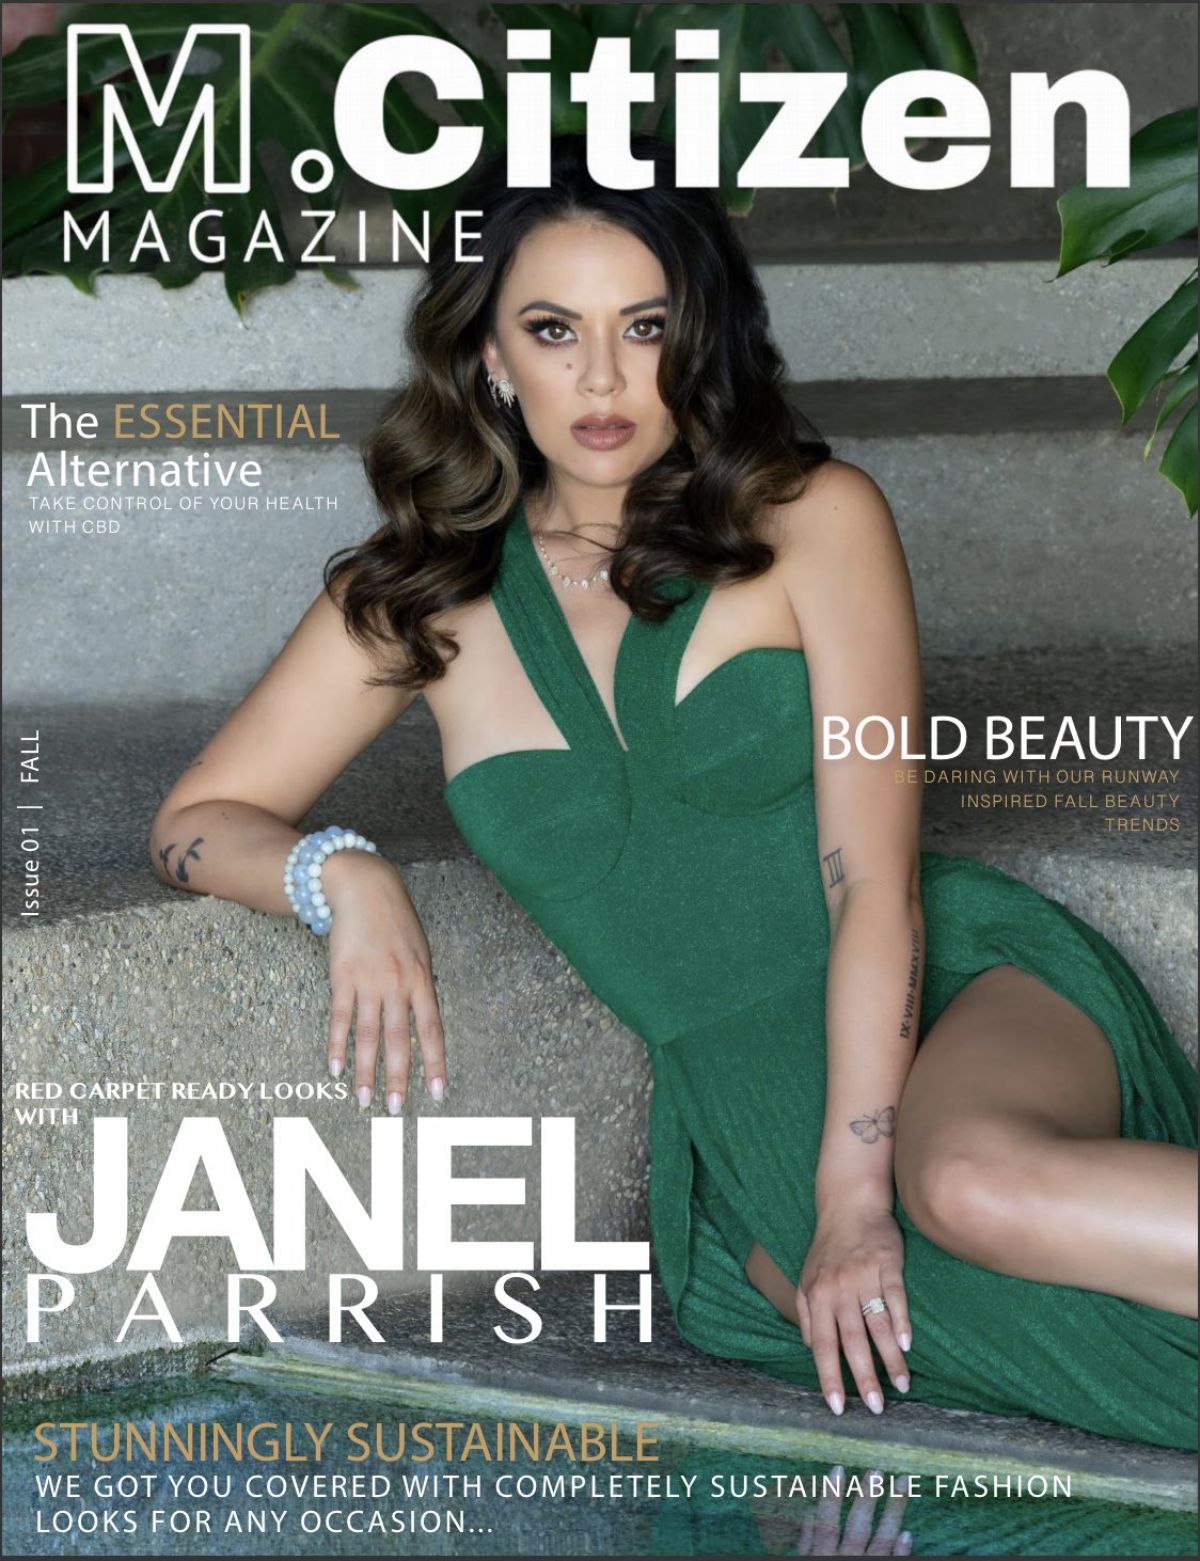 Janel Parrish in M. Citizen Magazine, Fall 2020 Issue